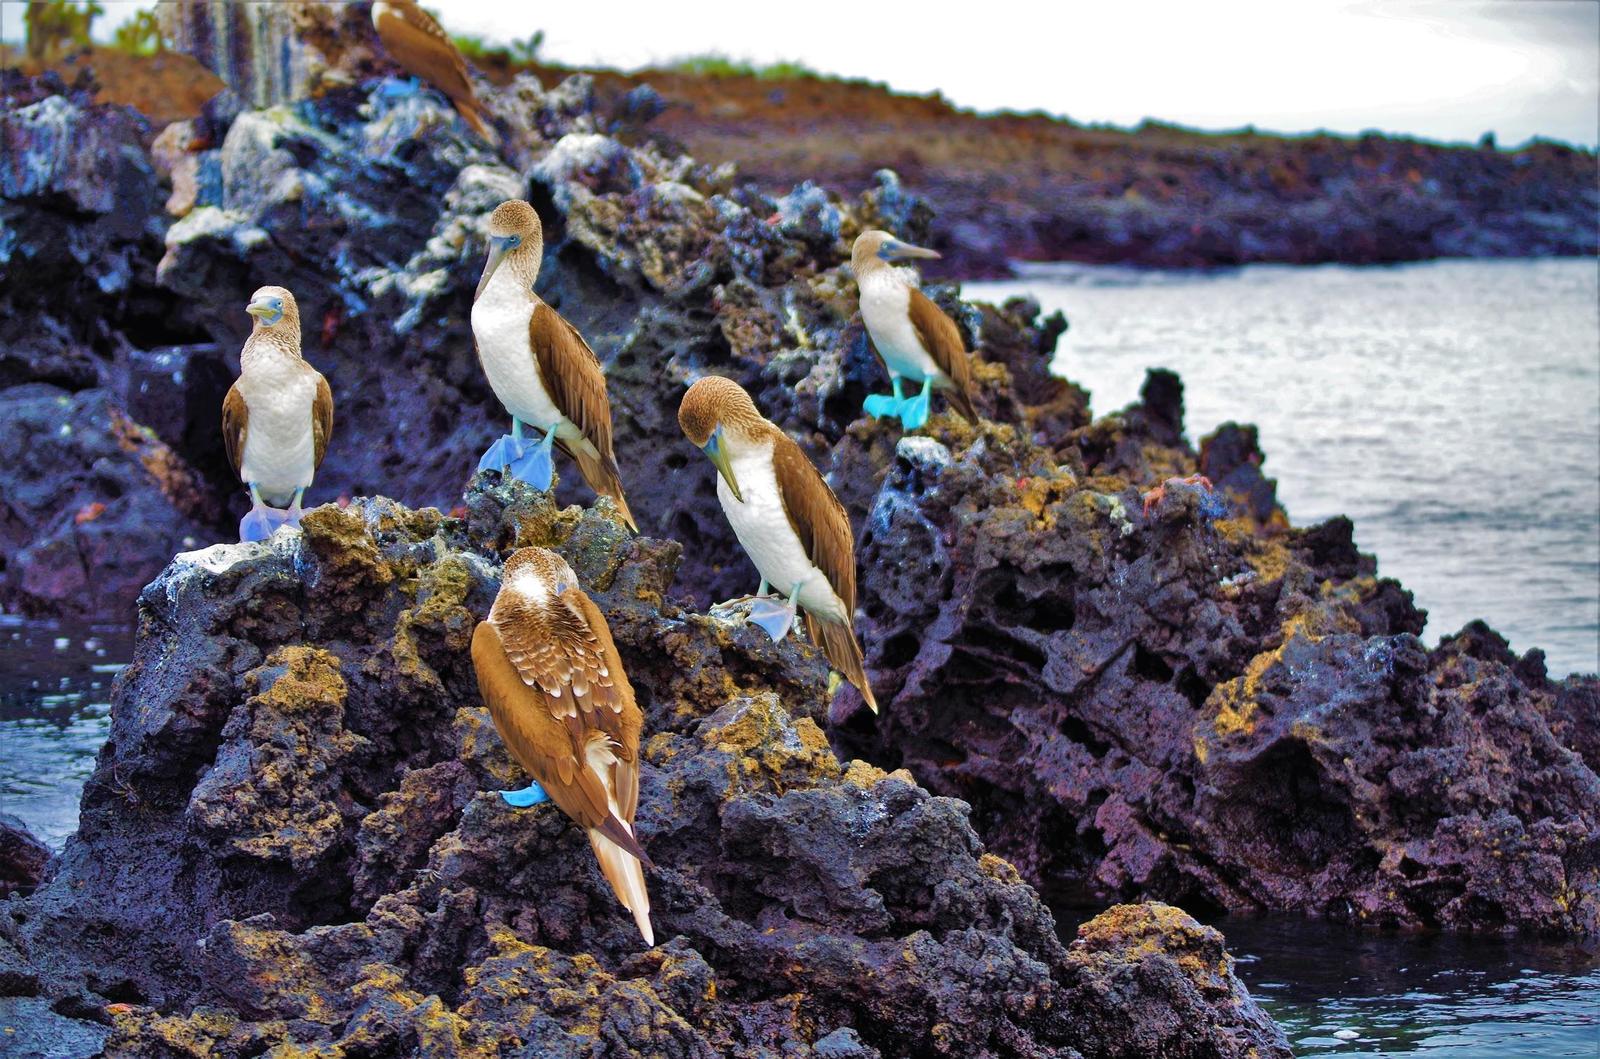 Blue-footed Booby Photo by Alicia Thatcher